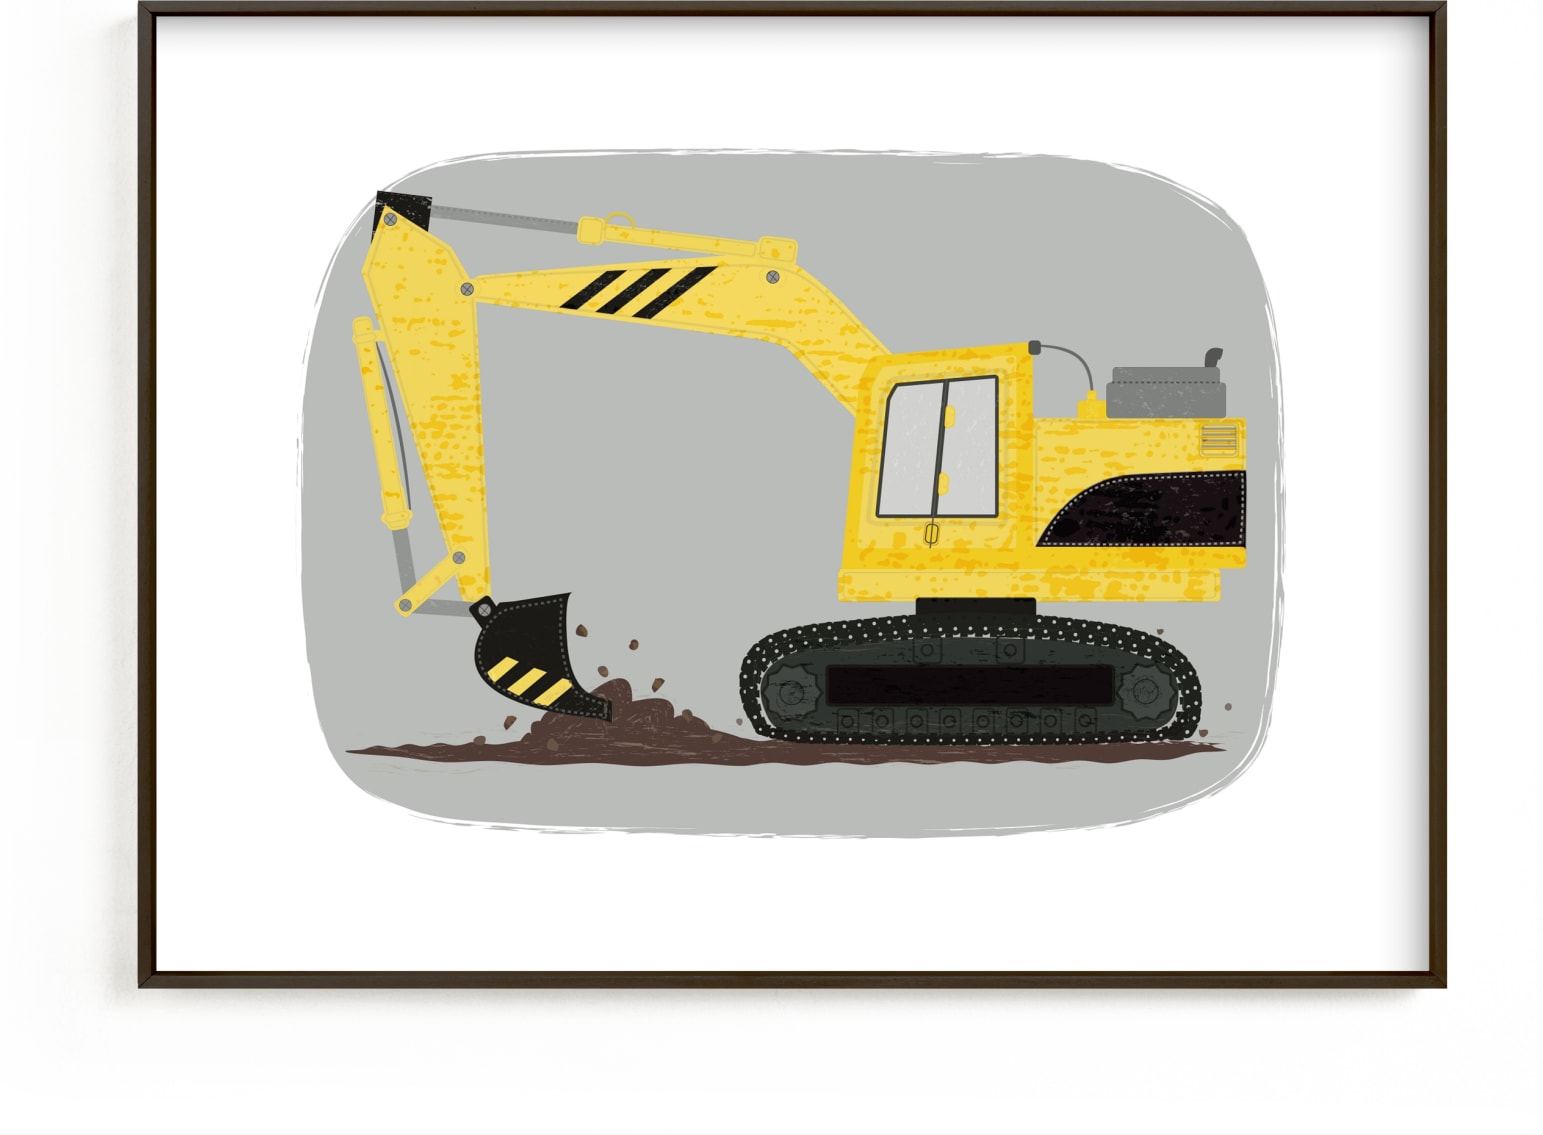 This is a yellow kids wall art by Rebecca Marchese called The Construction Excavator.